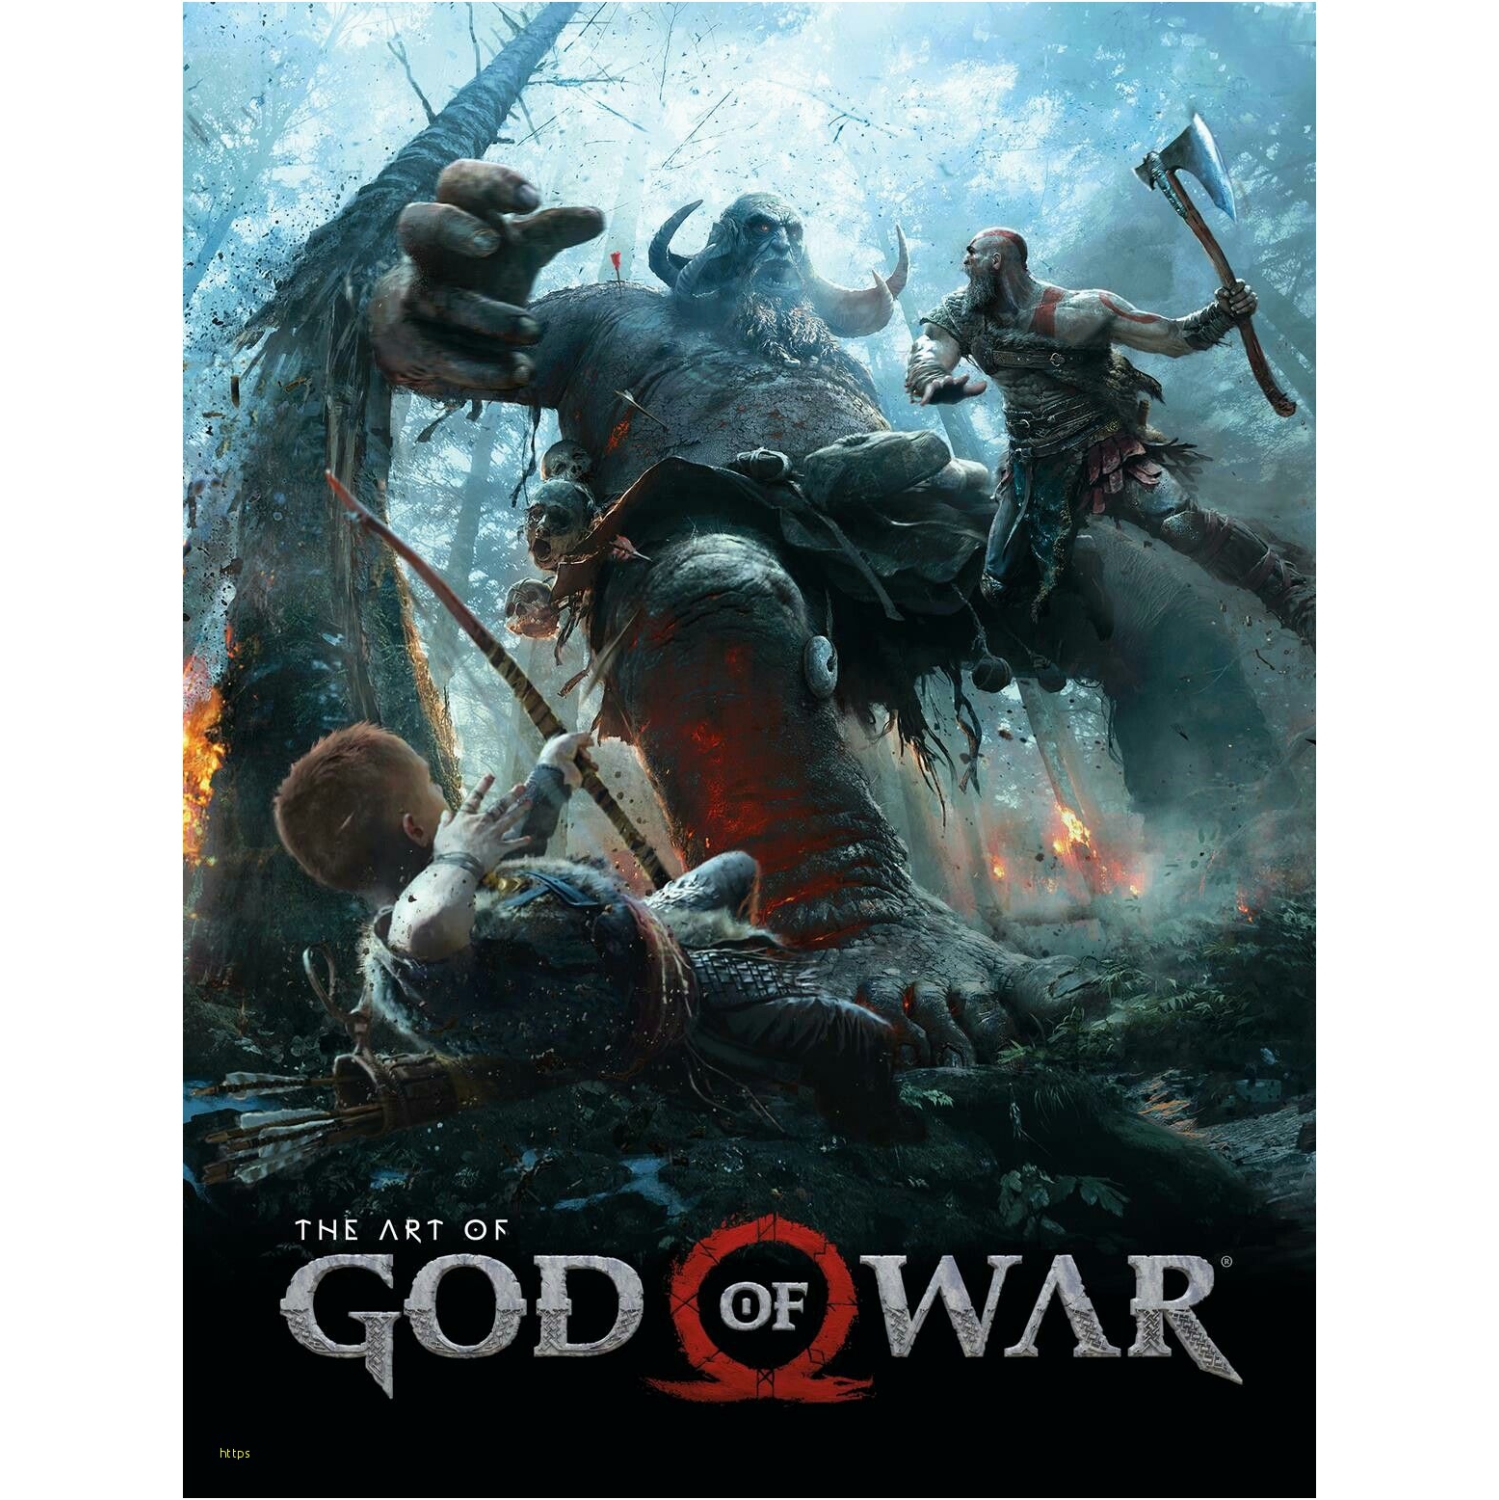 The Art of God of War Hard Cover Book